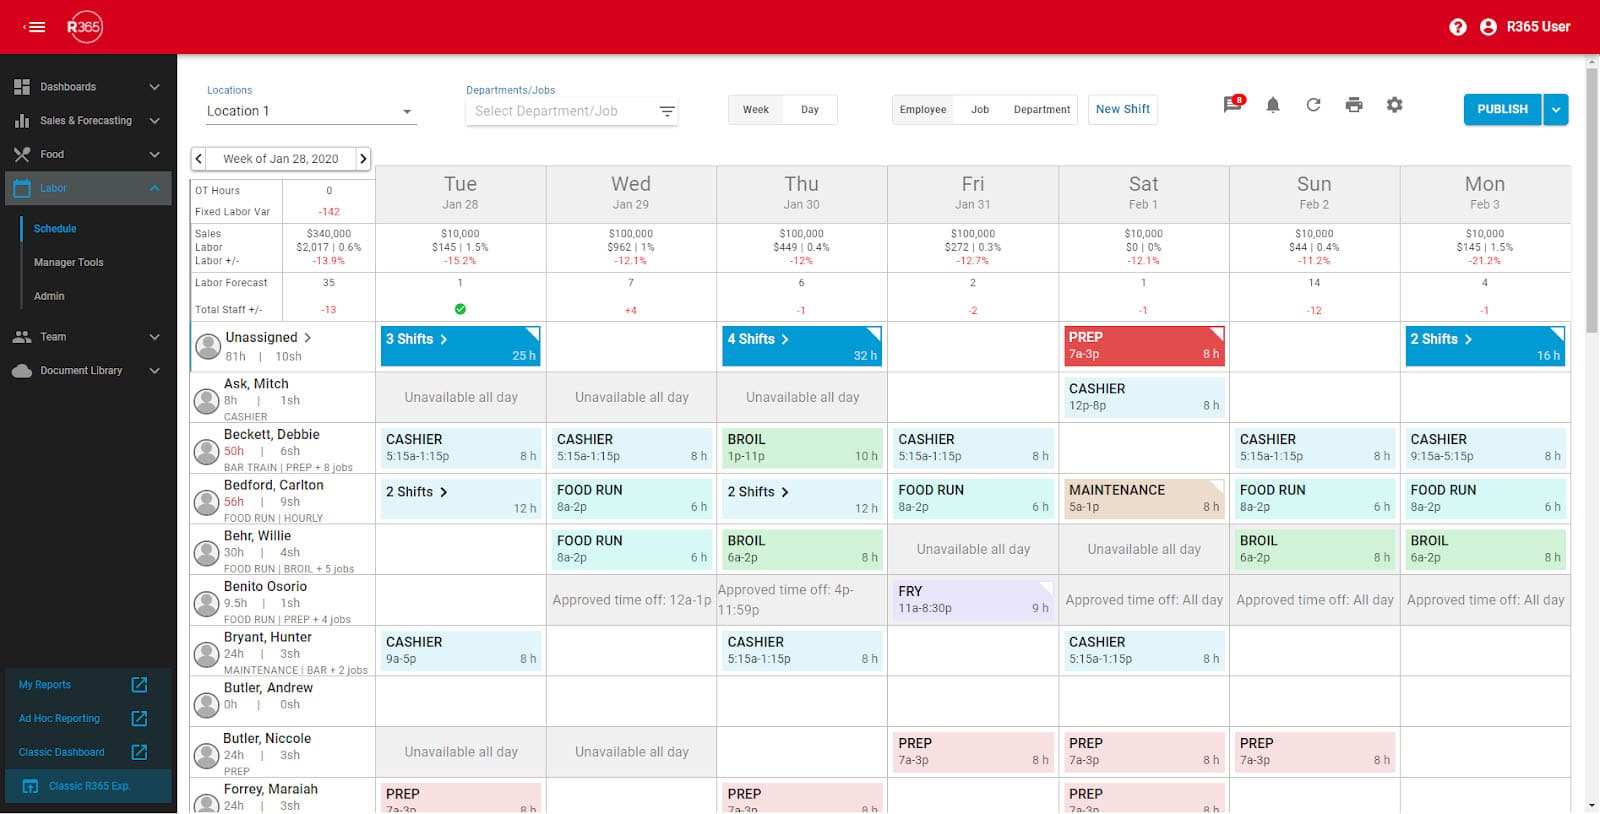 Image showing schedules logged in Restaurant365's calendar.